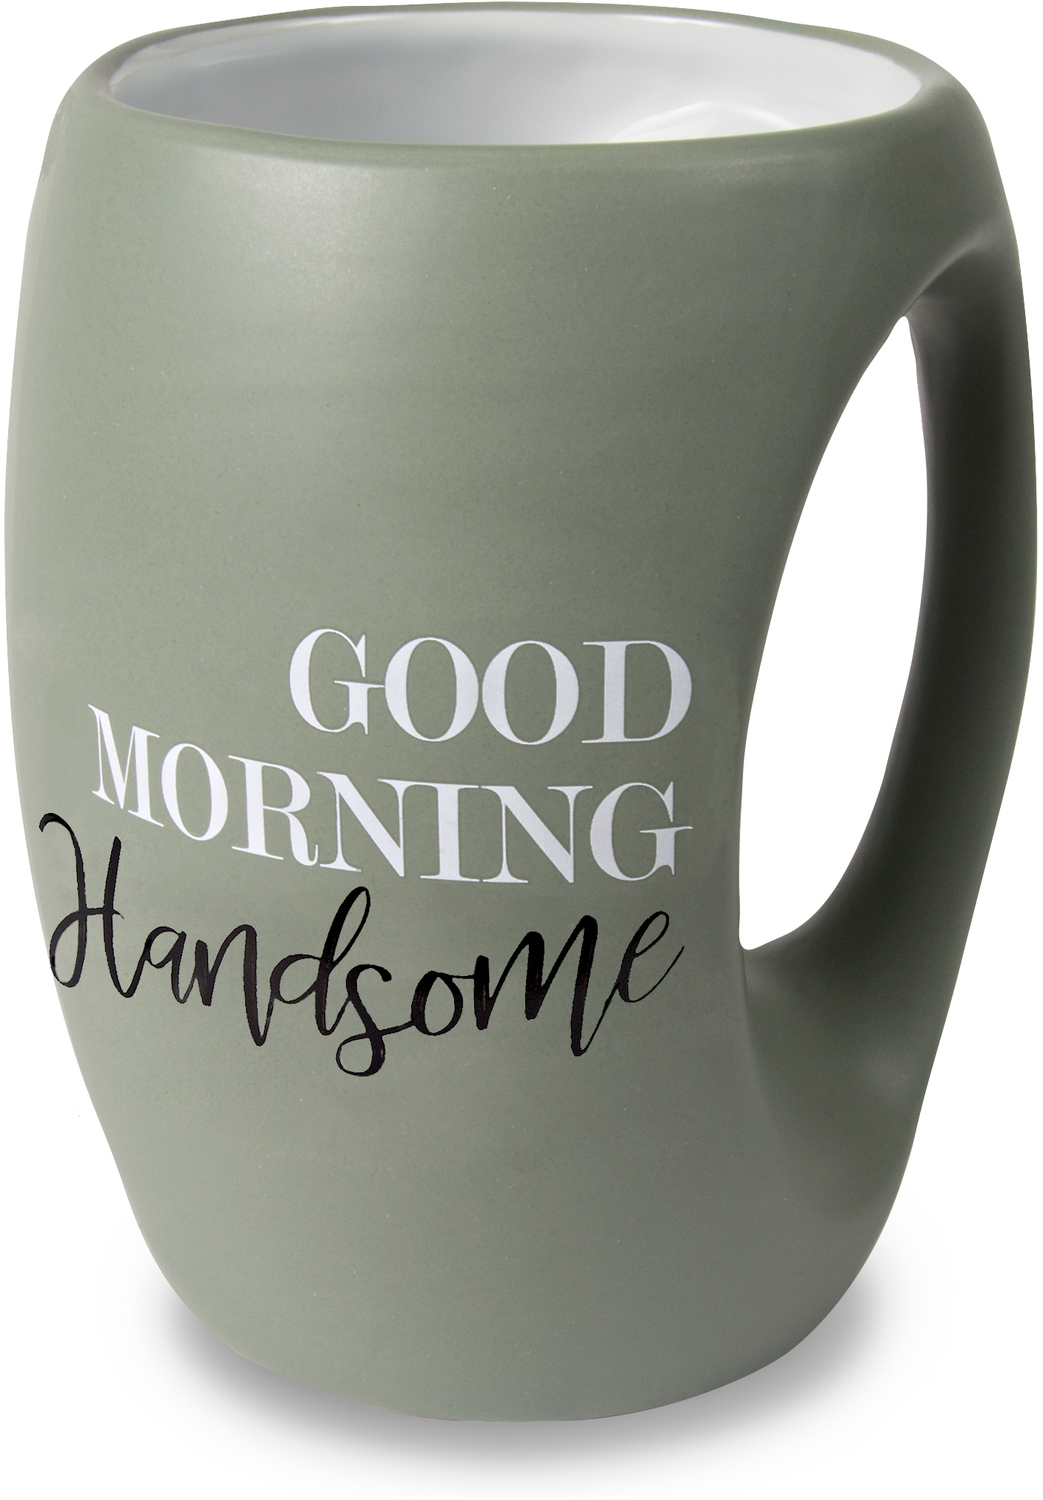 Handsome by Good Morning - Handsome - 16 oz Cup